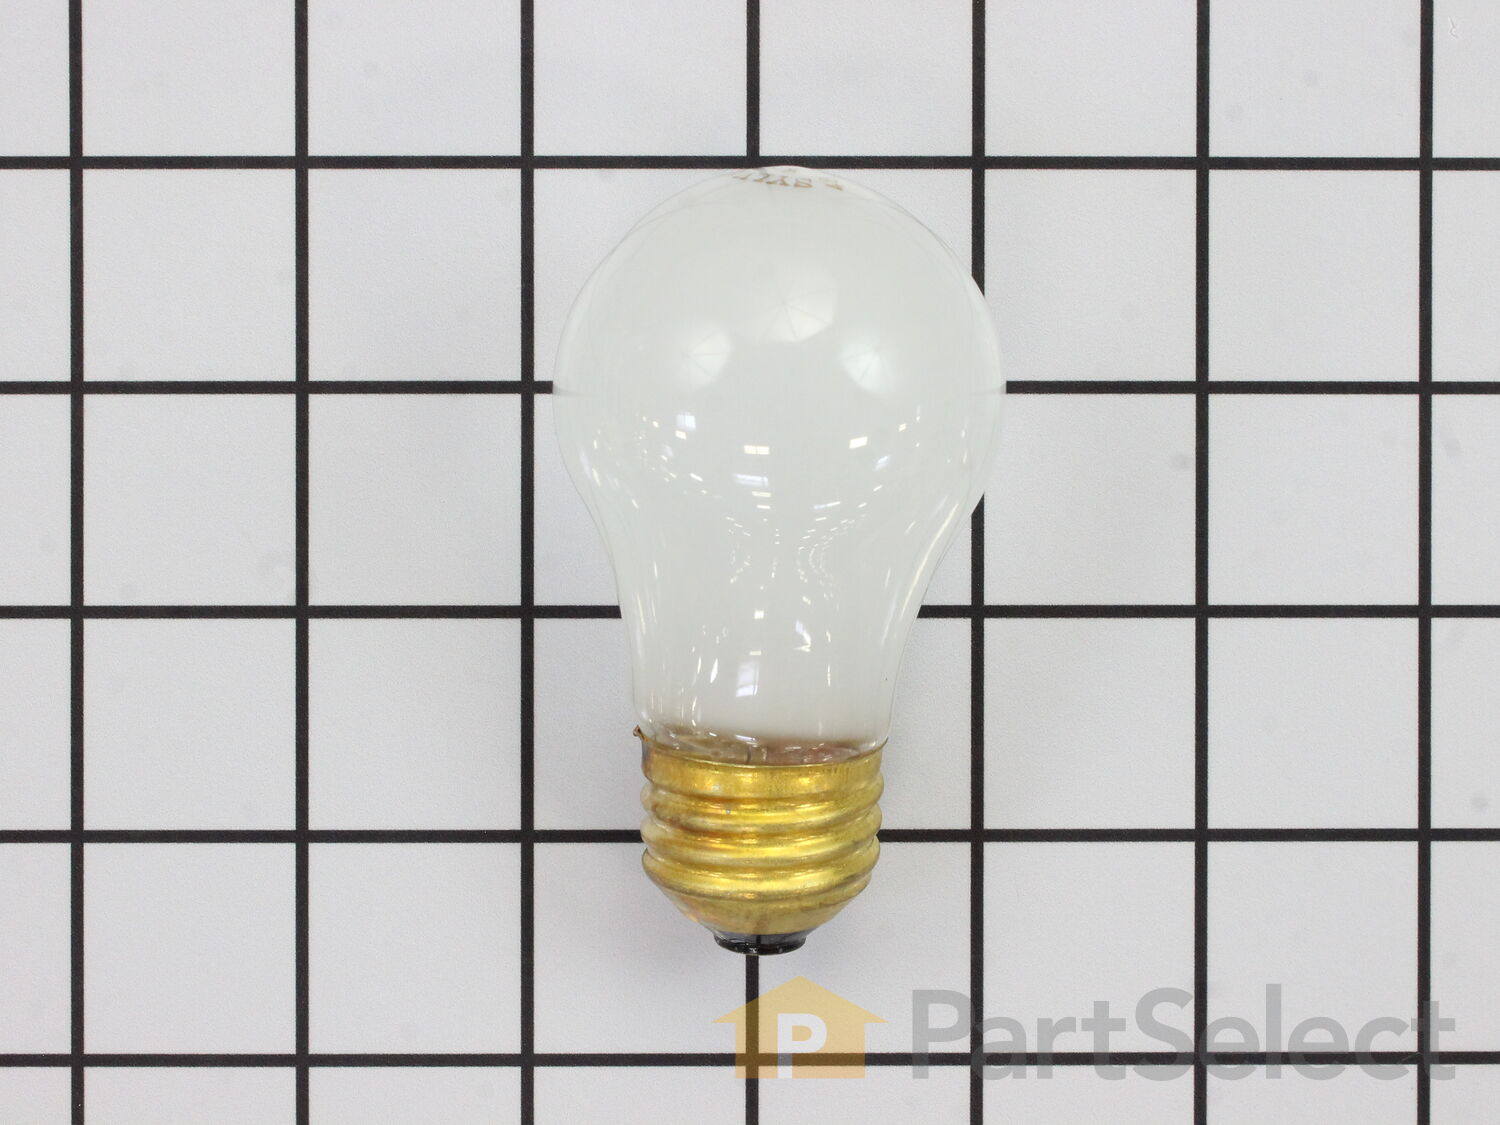 AMI PARTS 8009 Bulb 40w 130v Replacement Light Specially Designed to Withstand Extreme Temperatures Often Used to Light The Inside of Refrigerators and Ranges 1pc 